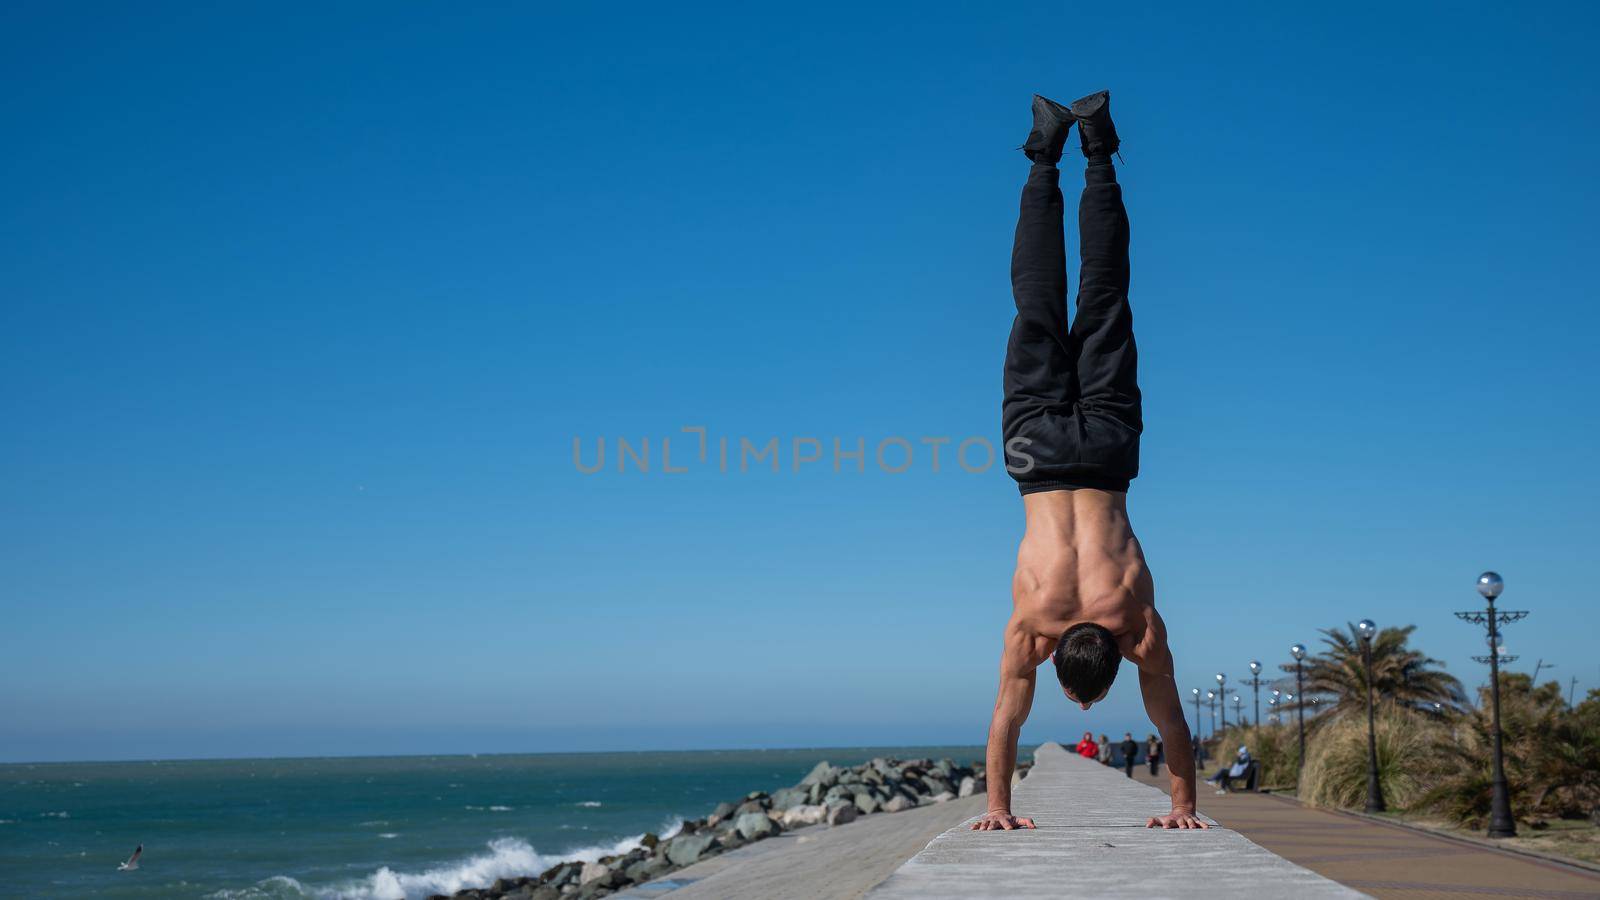 Shirtless man doing a handstand on the seashore. by mrwed54